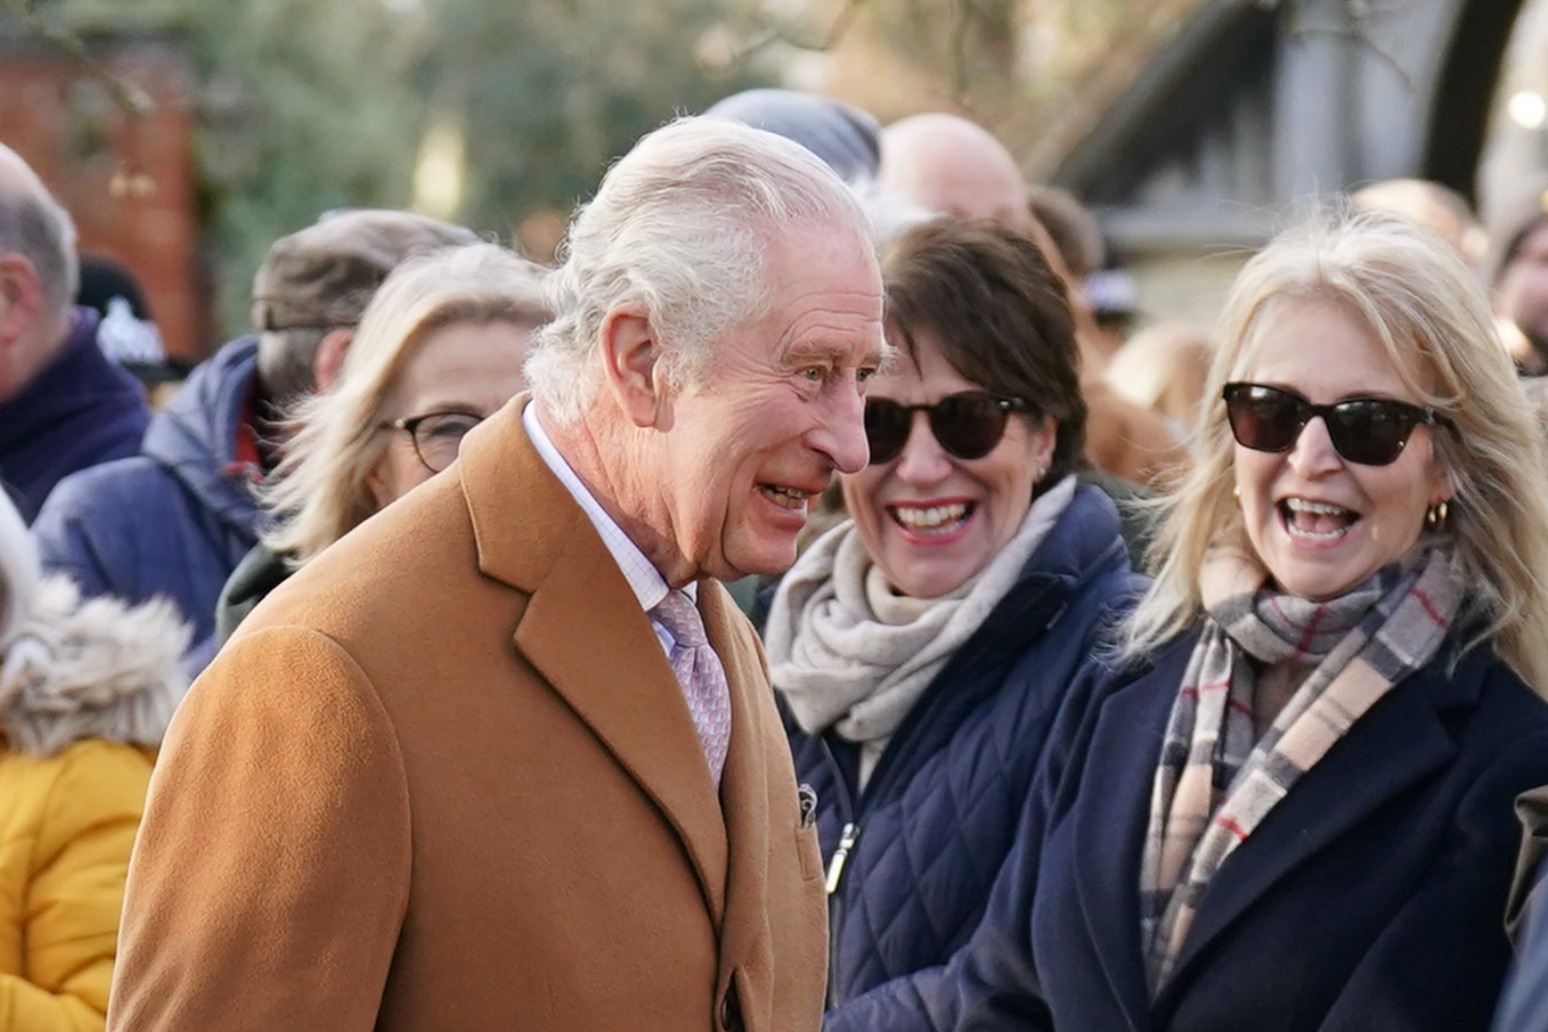 Smiling King seen for first time since Harry’s tell-all book published 